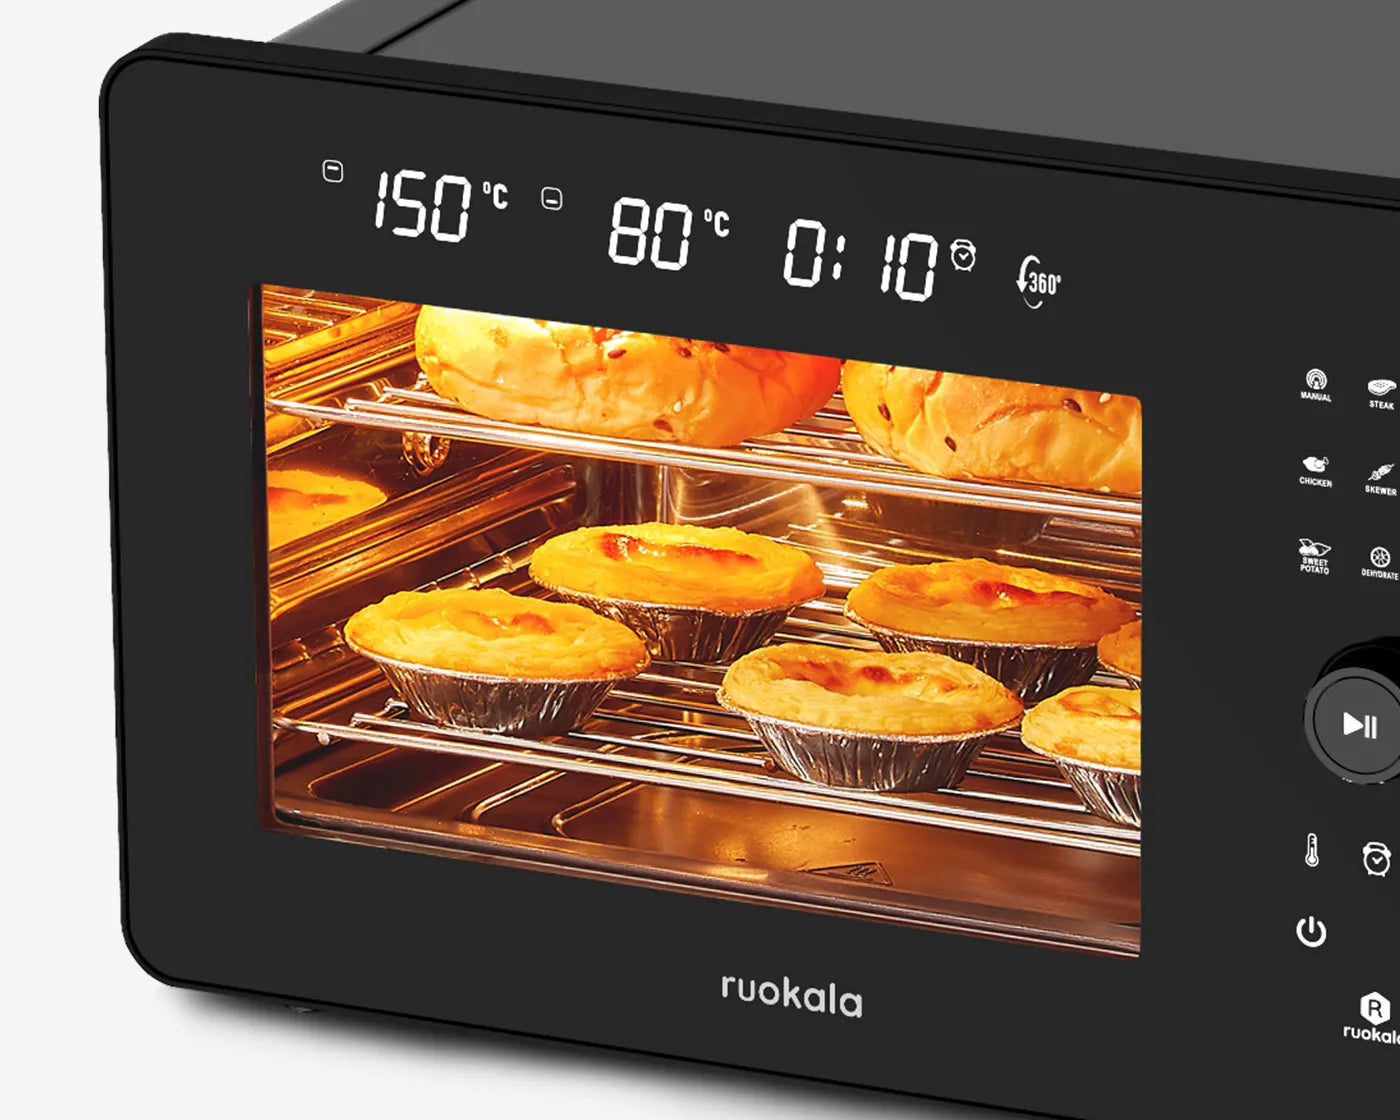 Ruokala air fryer baking delicious pastries, featuring a digital display with precise temperature and time control.